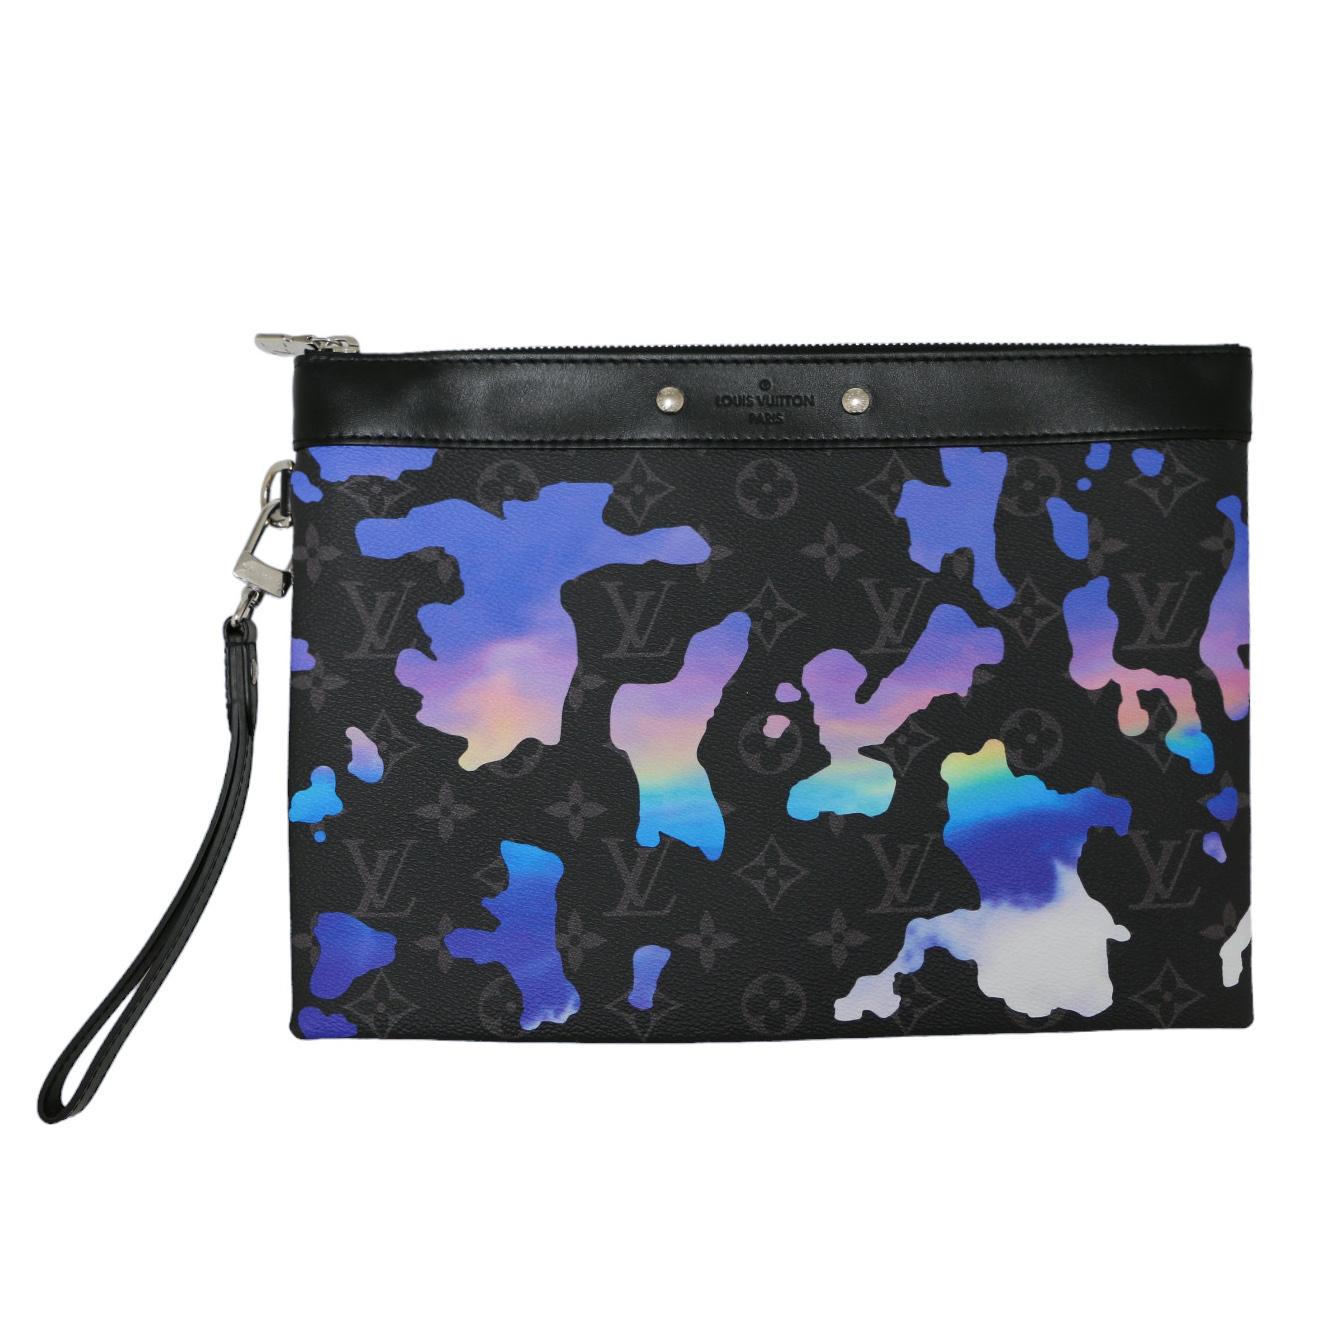 Collector Pochette To Go by LOUIS VUITTON with Sunrise Monogram Eclipse toile
Condition: never worn
Made in Spain
Model: To-Go
Gender: male
Material: Sunrise coated canvas
Interior: black textile
Color: black
Dimensions: 30 x 21.5 x 1 cm
Serial